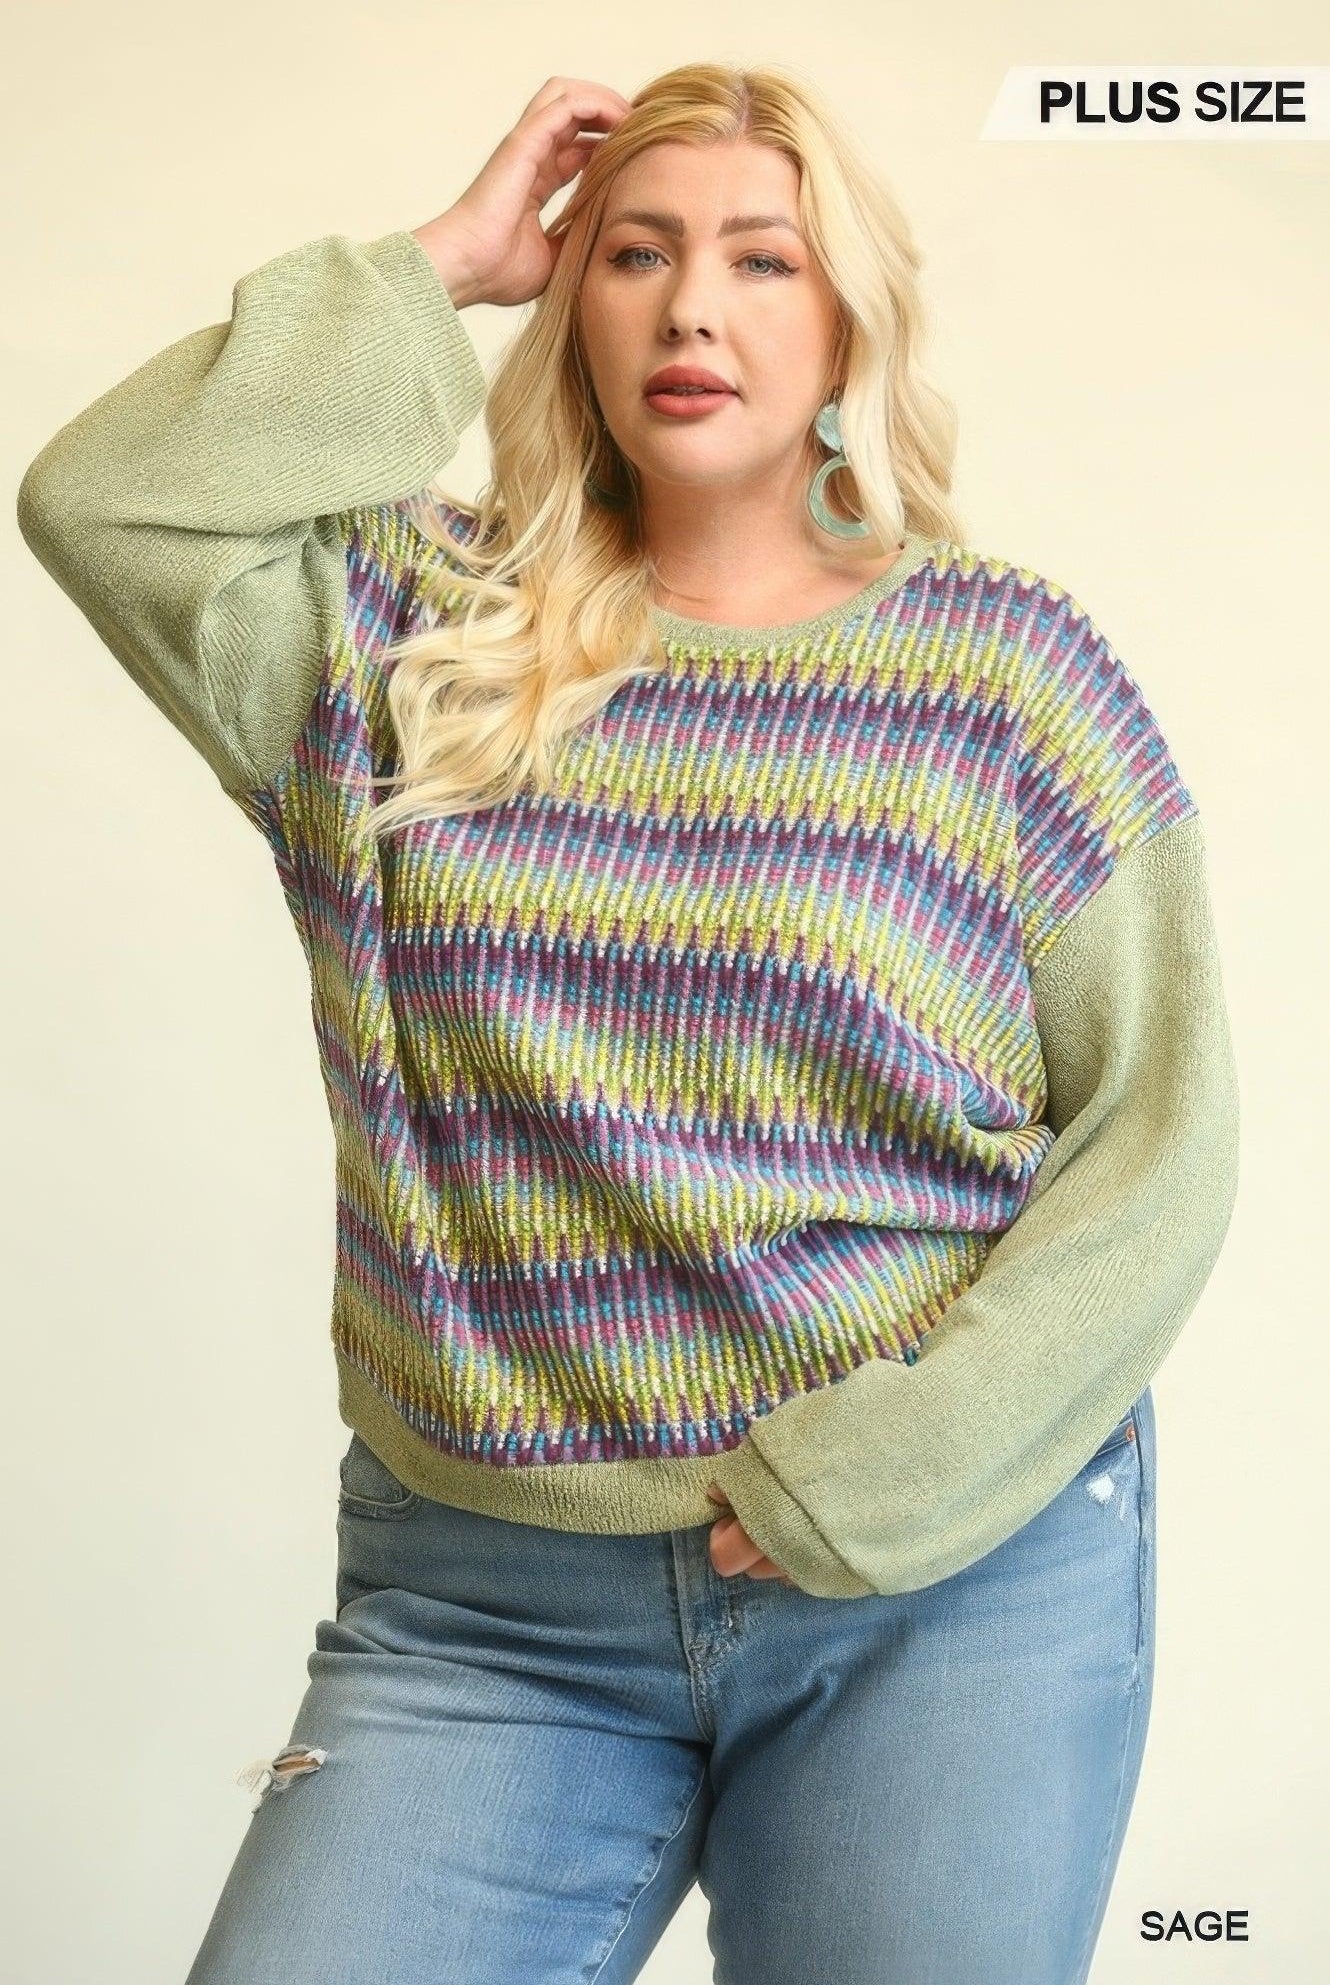 Women's Shirts Multi Color Novelty Knit Solid Knit Mixed Loose Top with Drop Down Shoulder